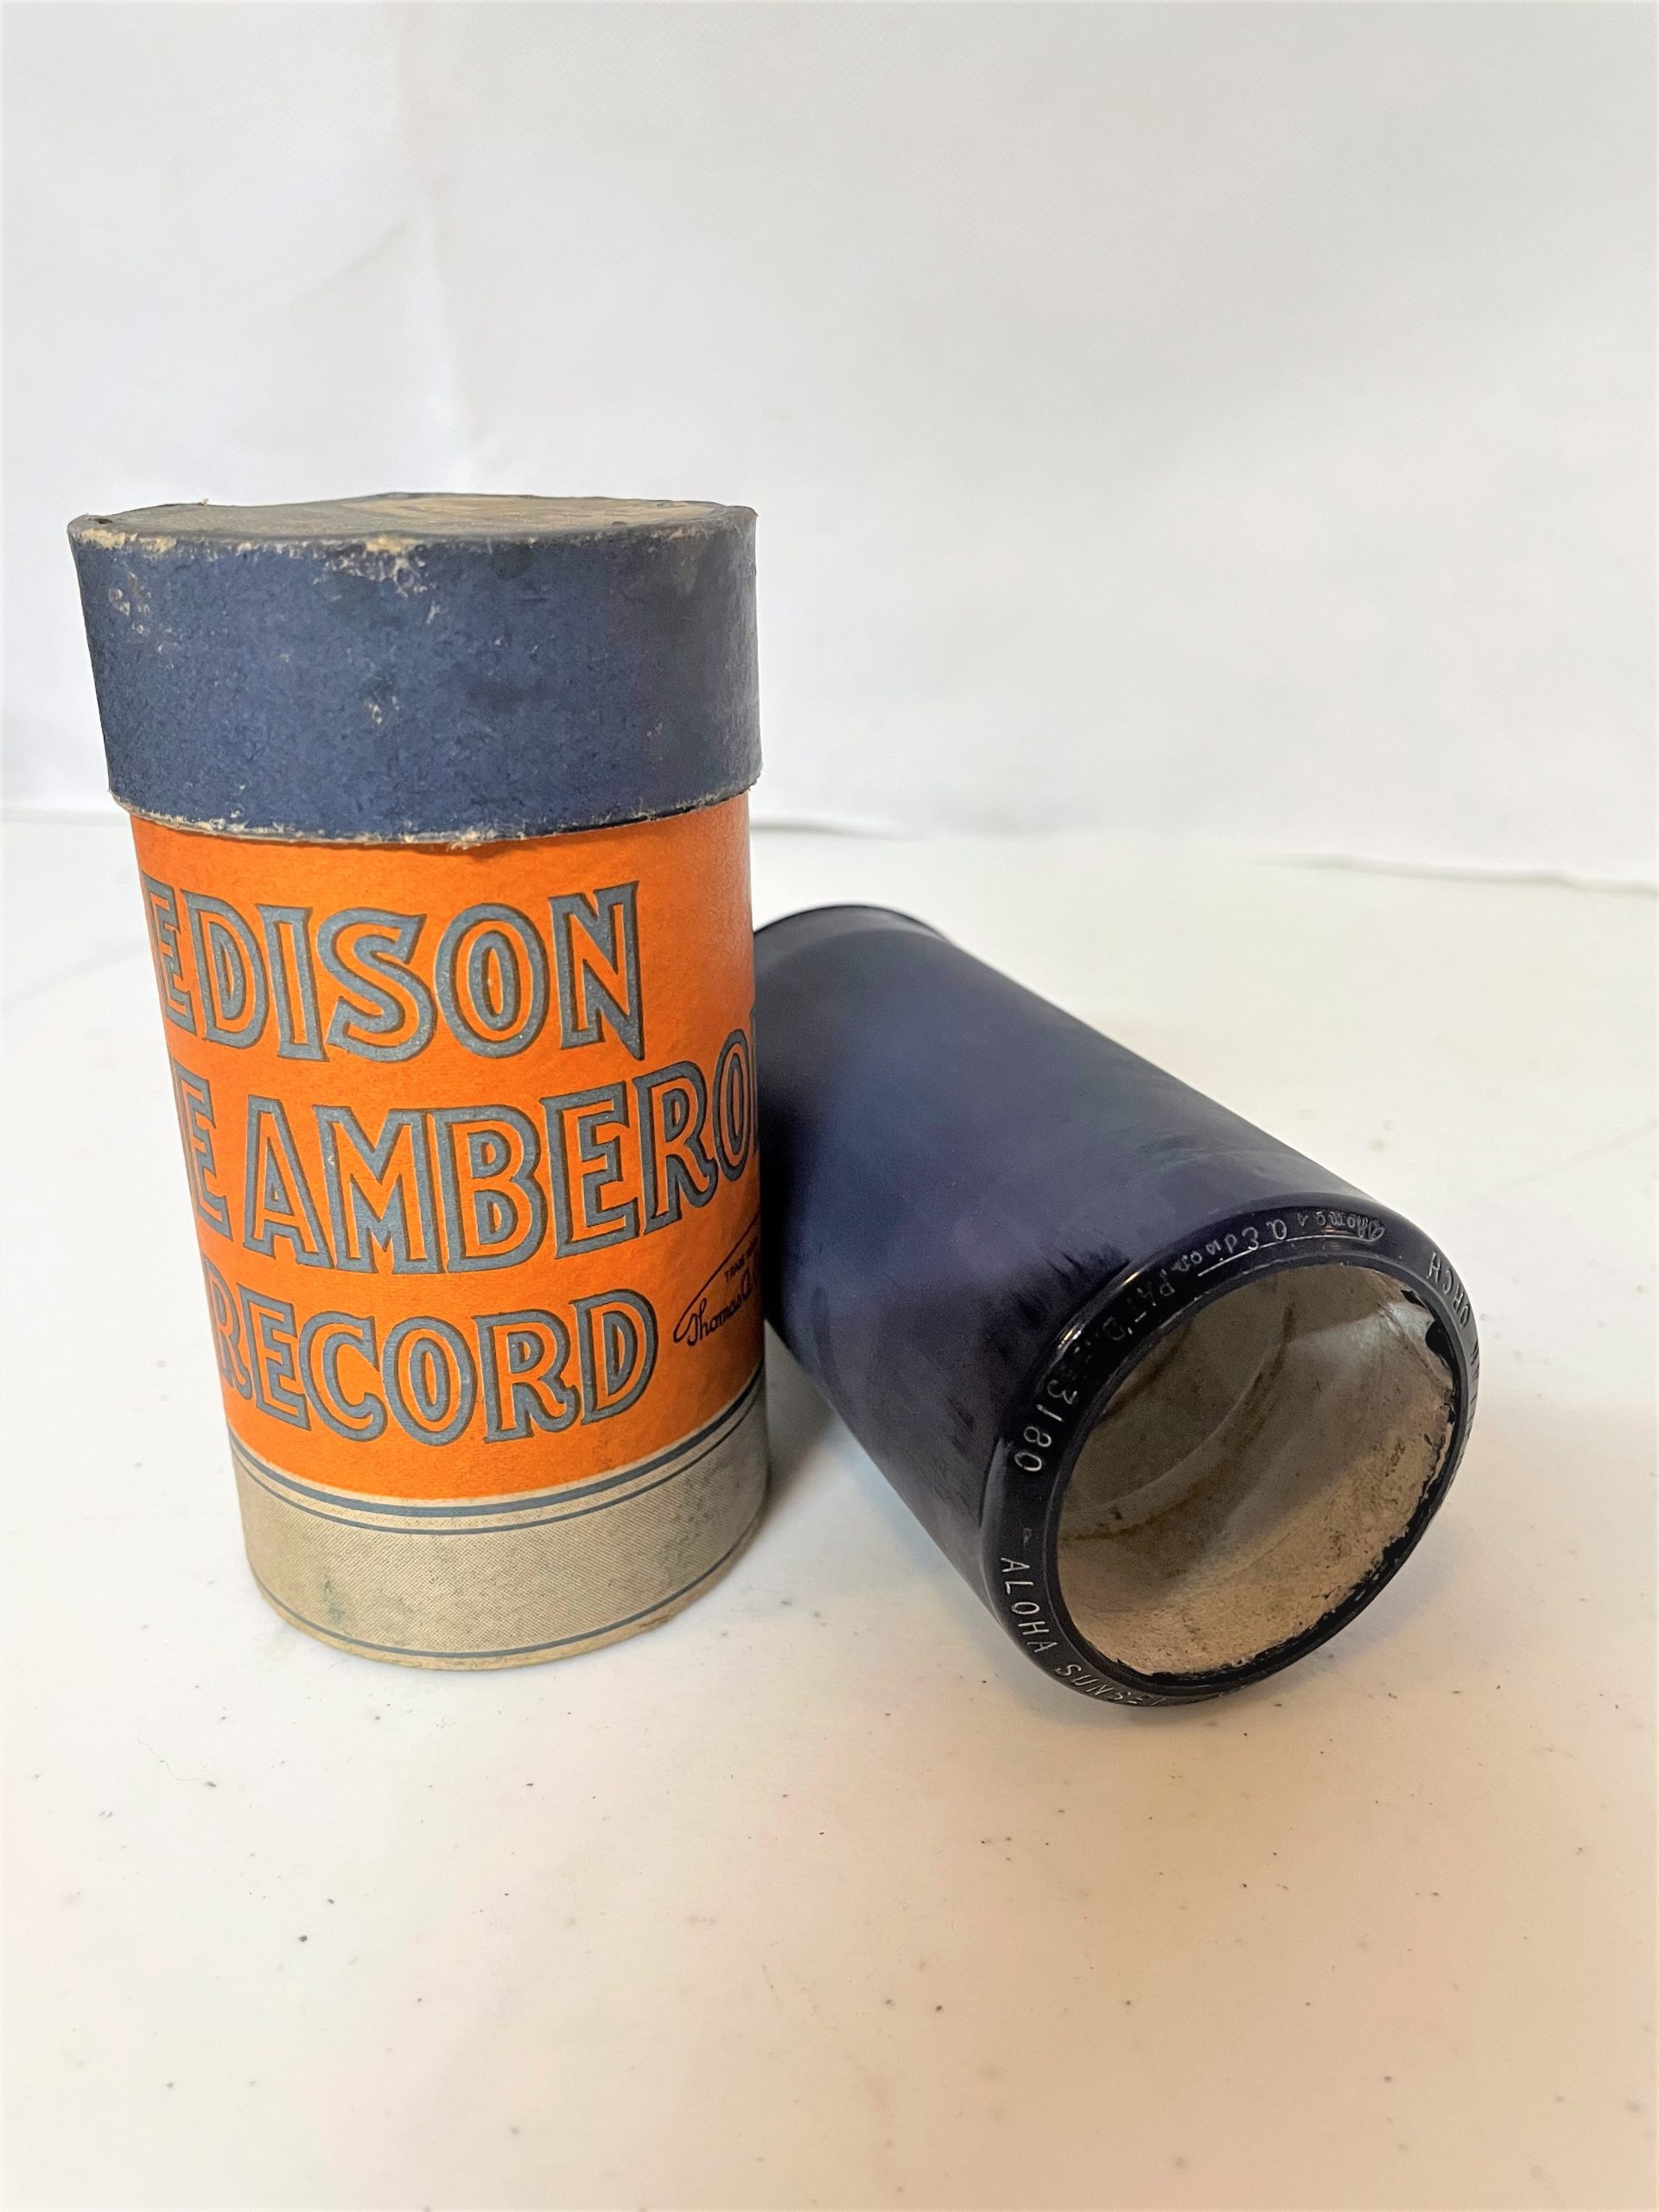 Edison 4 minute cylinder… “I’ve got my Captain Working for Me Now”